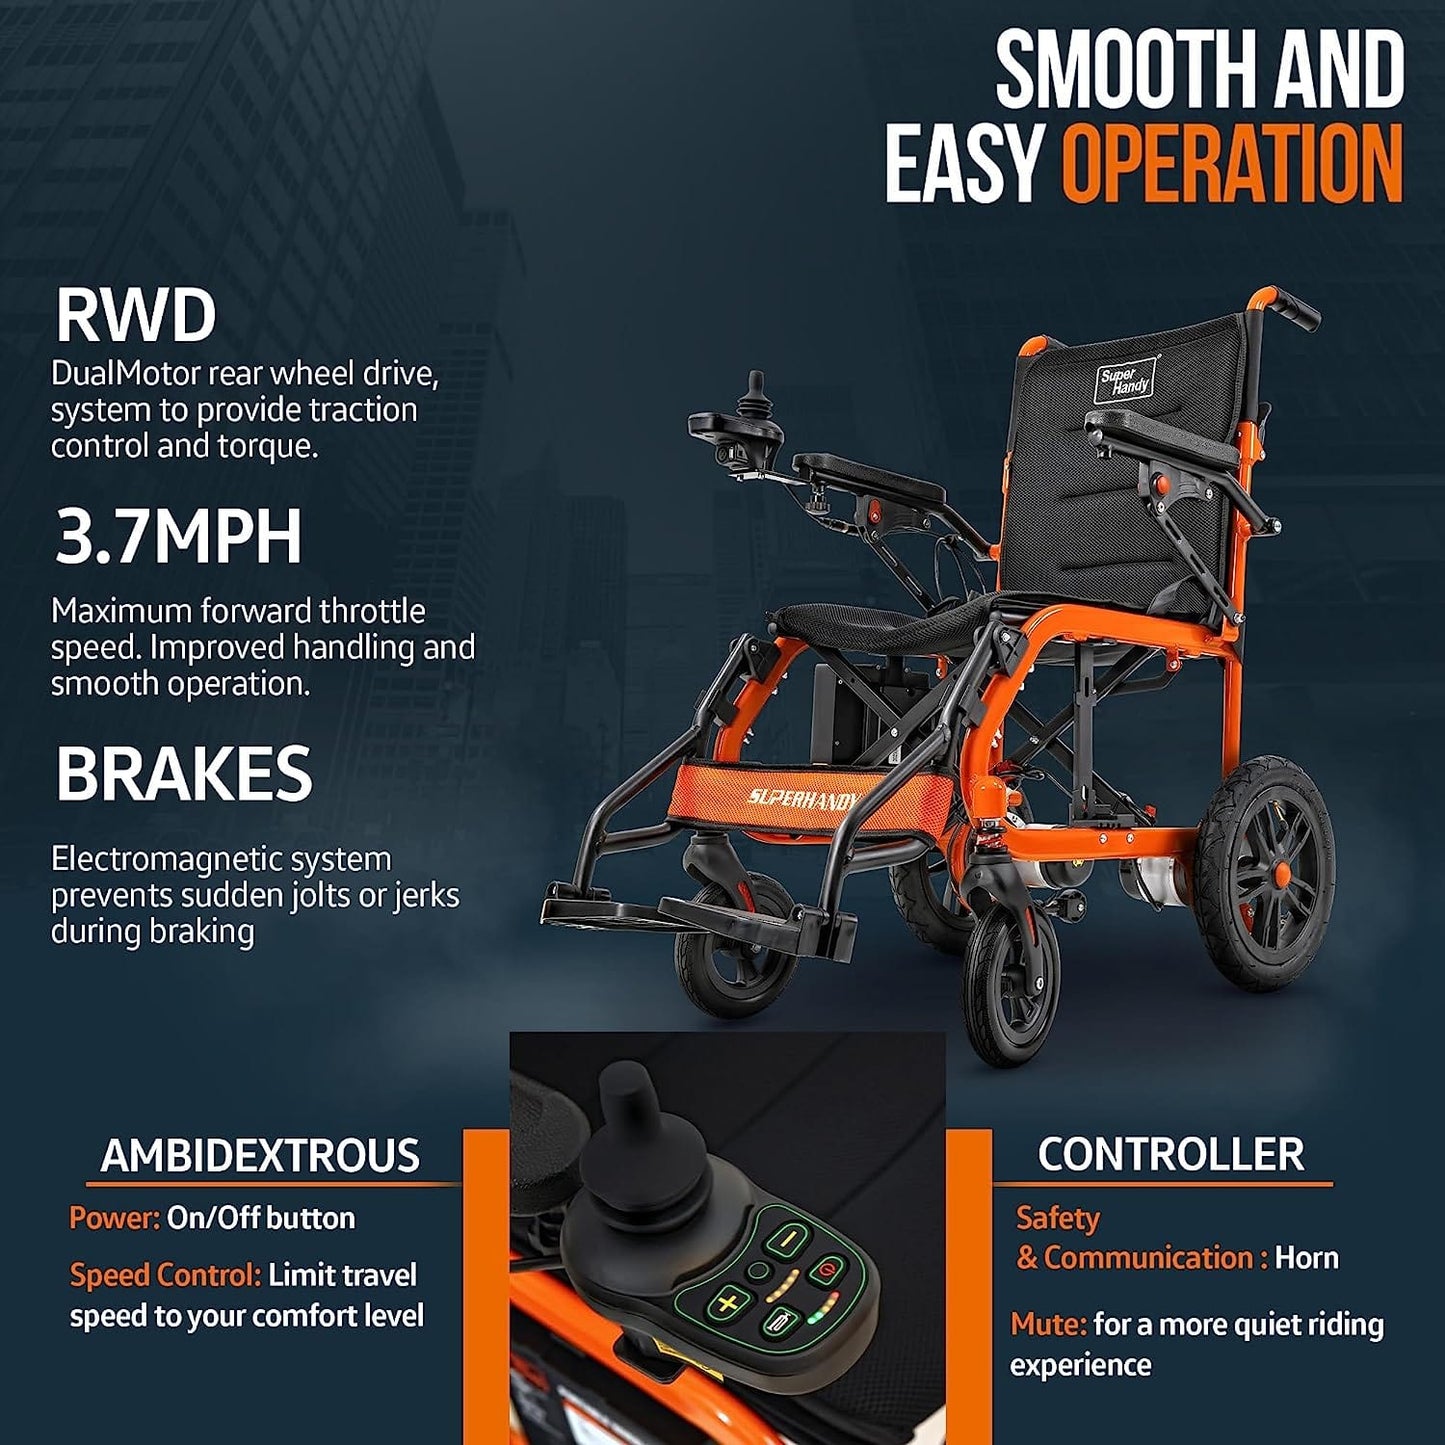 SuperHandy Lightweight Aluminum Electric Wheelchair - Foldable Design, Powerful 250W Brushless Motor, 4MPH Max Speed, 9 Degree Max Slope - Comfortable Hand Controls, Electromagnetic Braking Electric Wheelchair